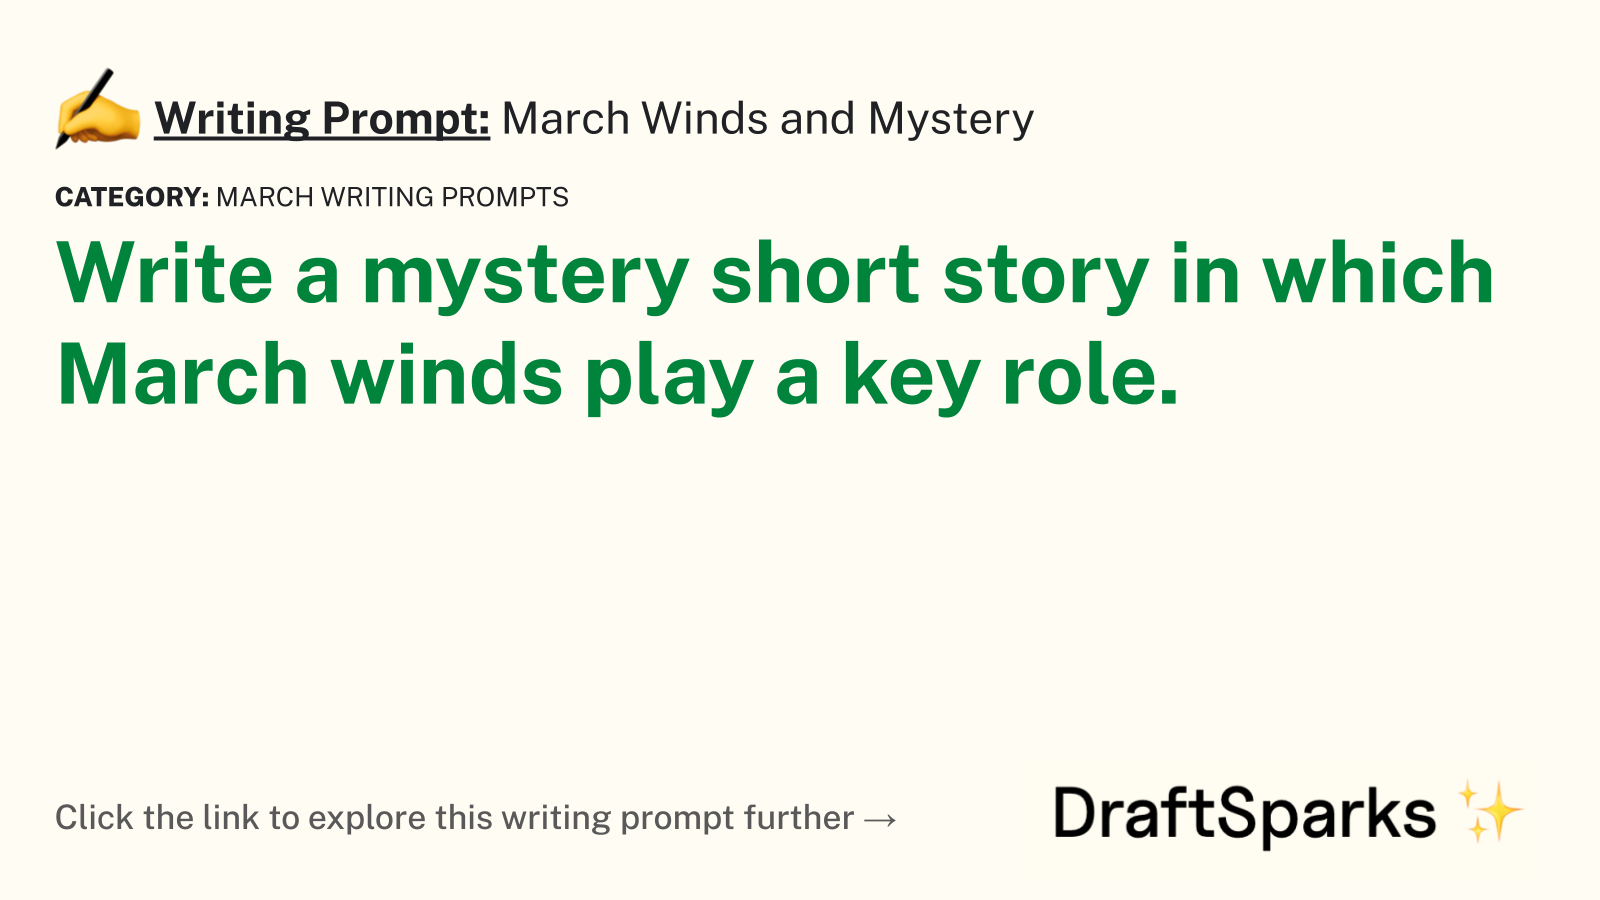 March Winds and Mystery